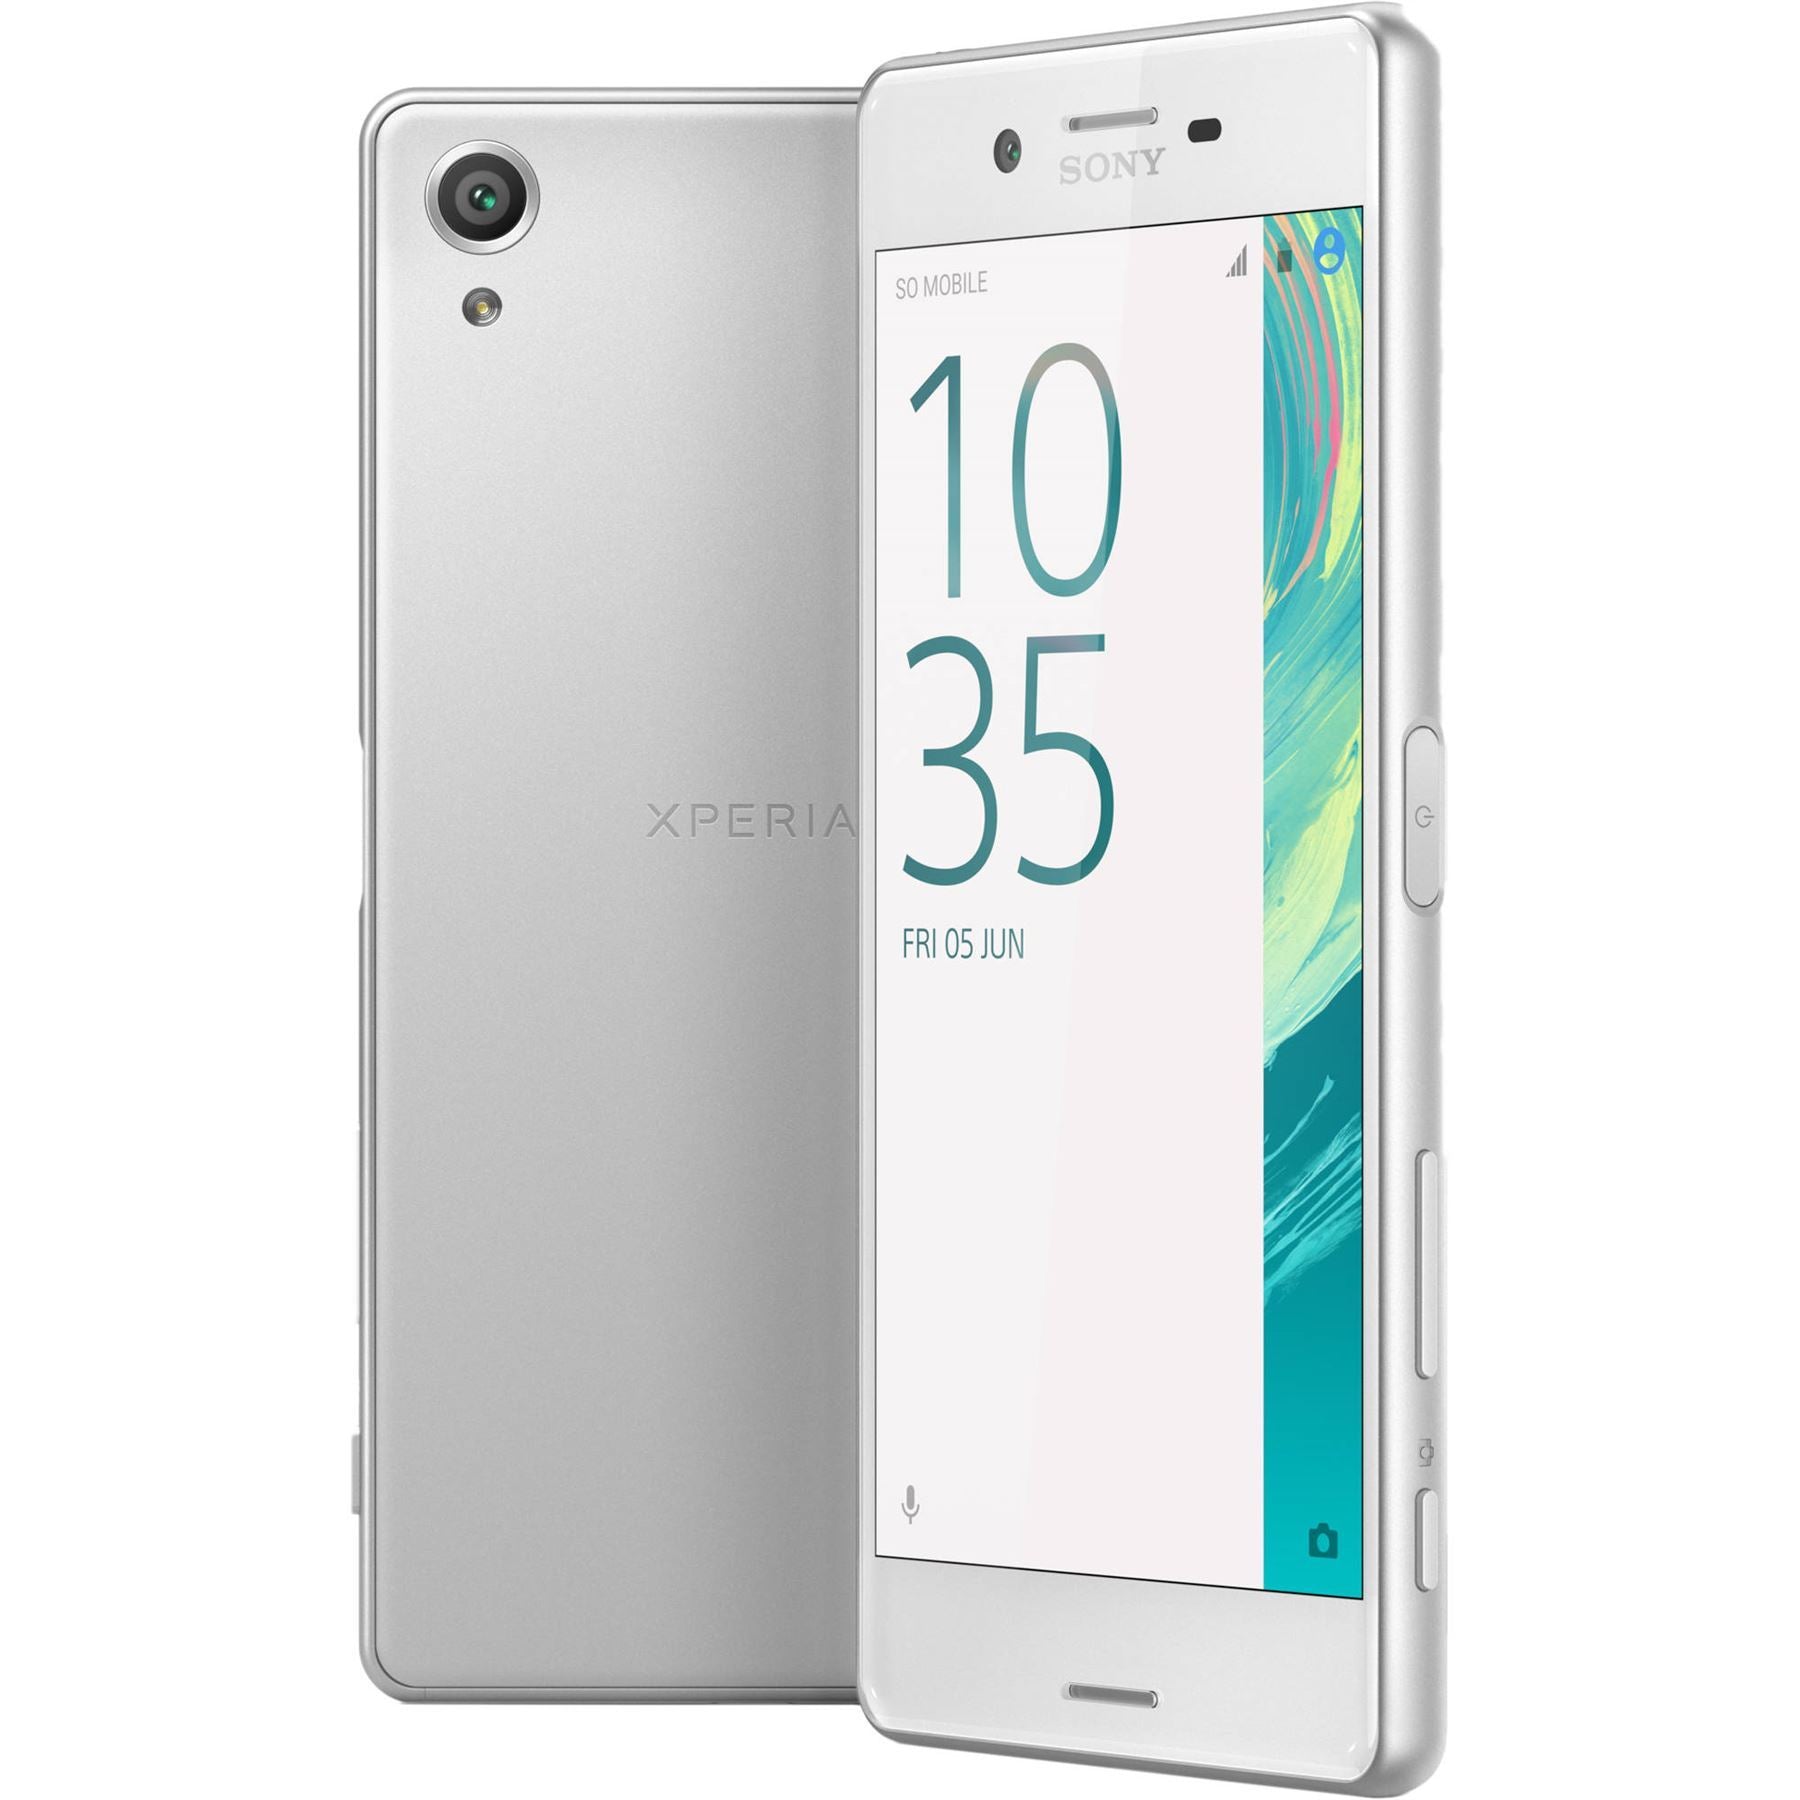 Sony Xperia X 32GB, White (Unlocked) - Refurbished Excellent